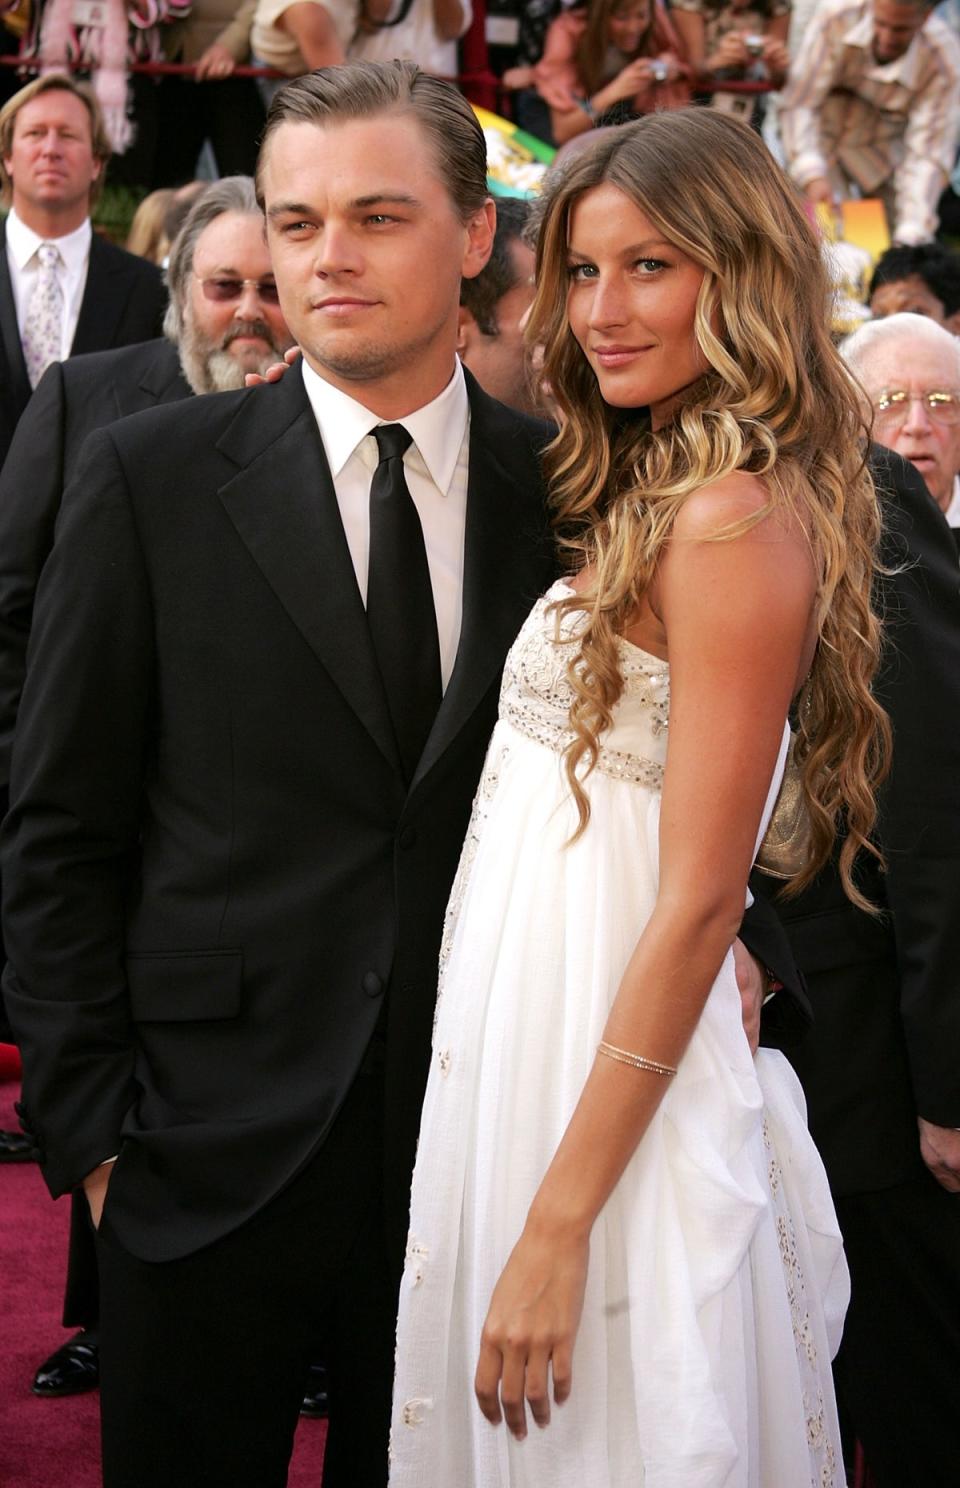 Leonardo DiCaprio first started dating model Gisele Bündchen when she was 18 and he was 24 (Getty Images)